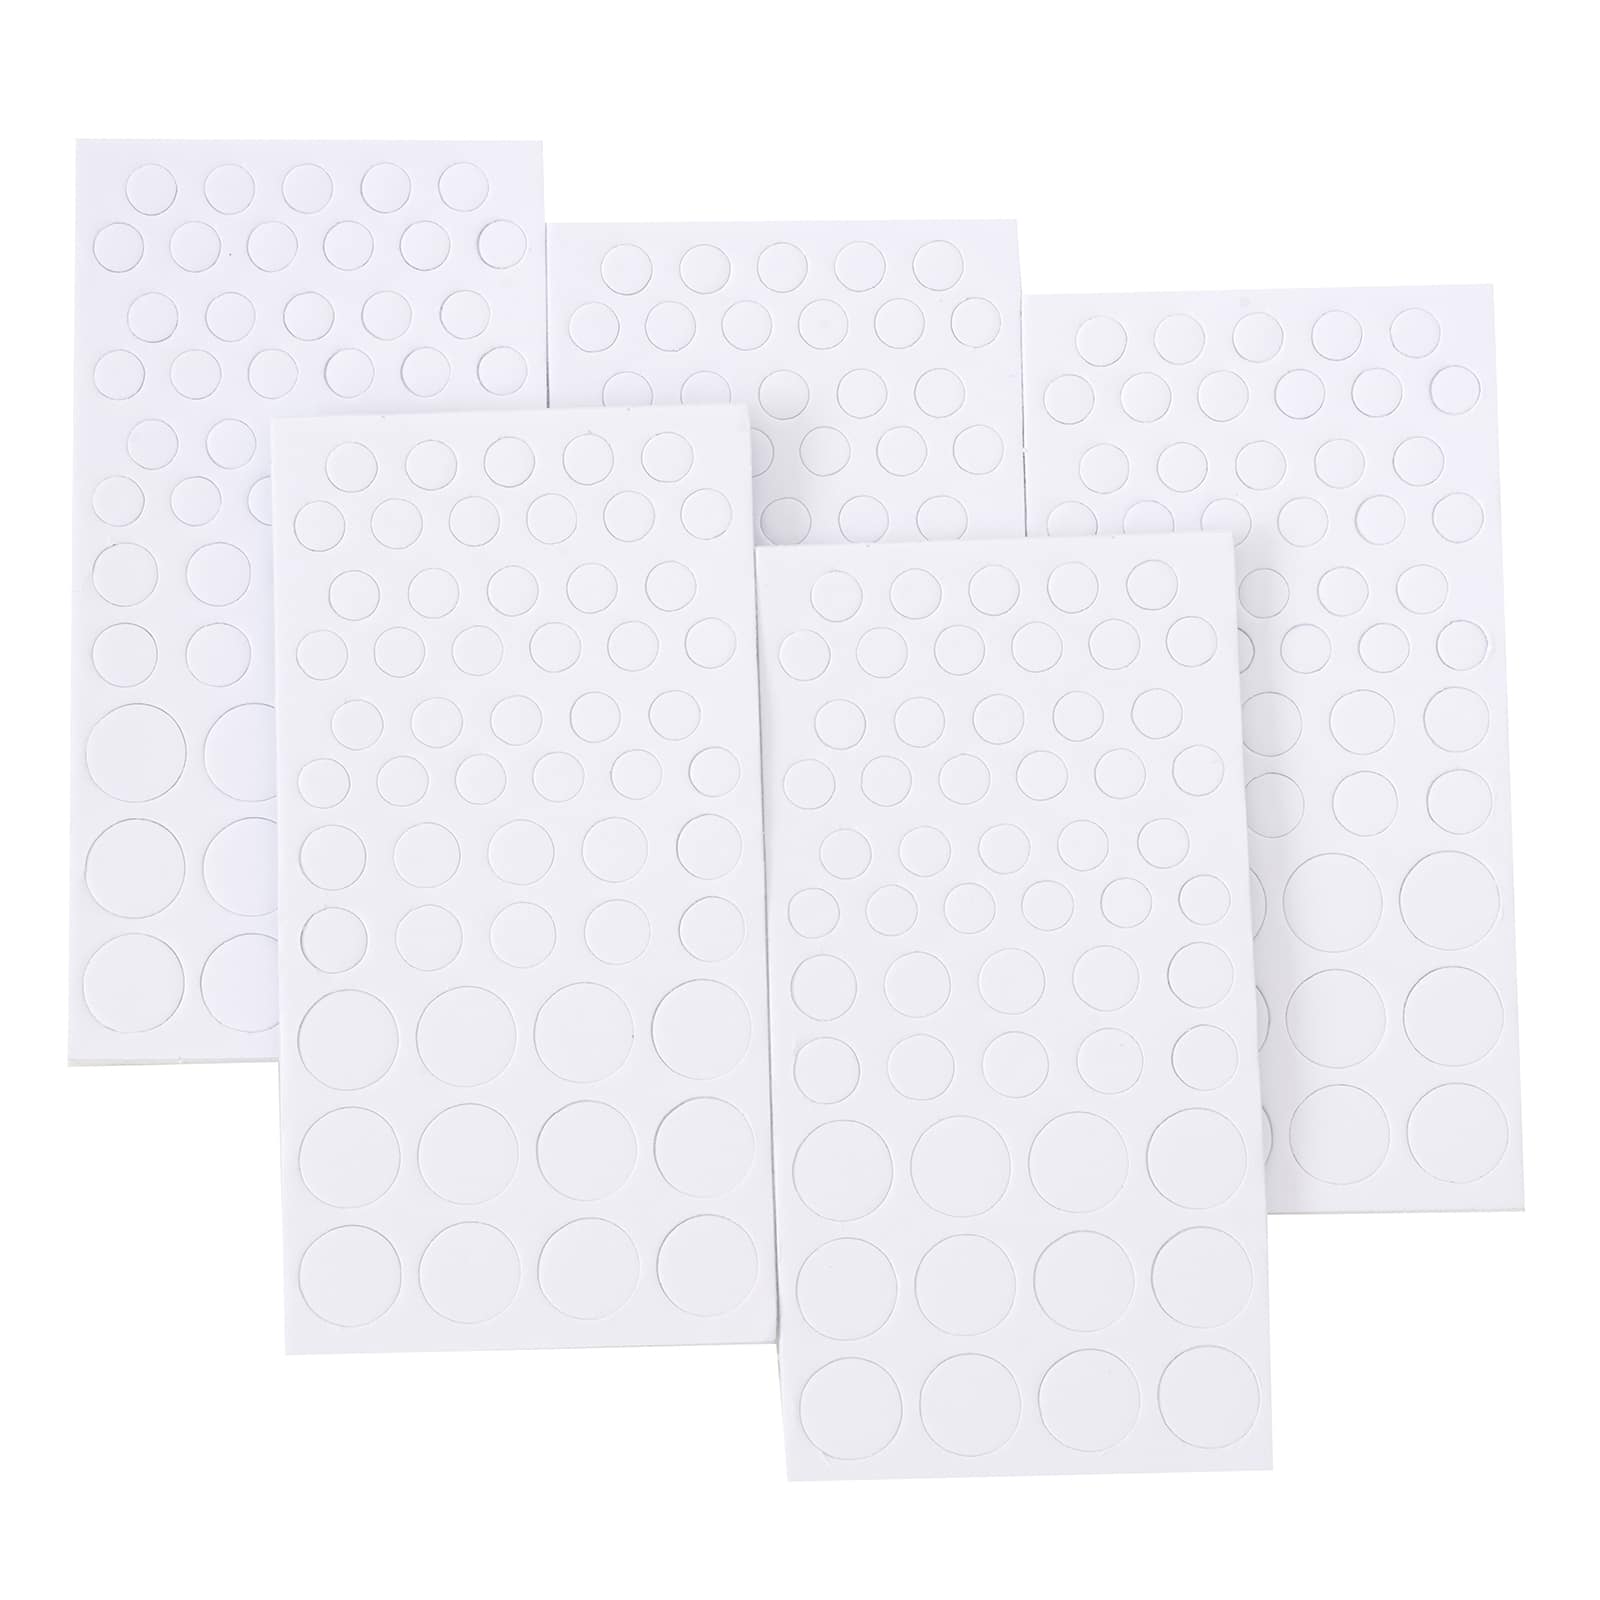 3mm Thick Adhesive Foam Dots by Recollections&#x2122;